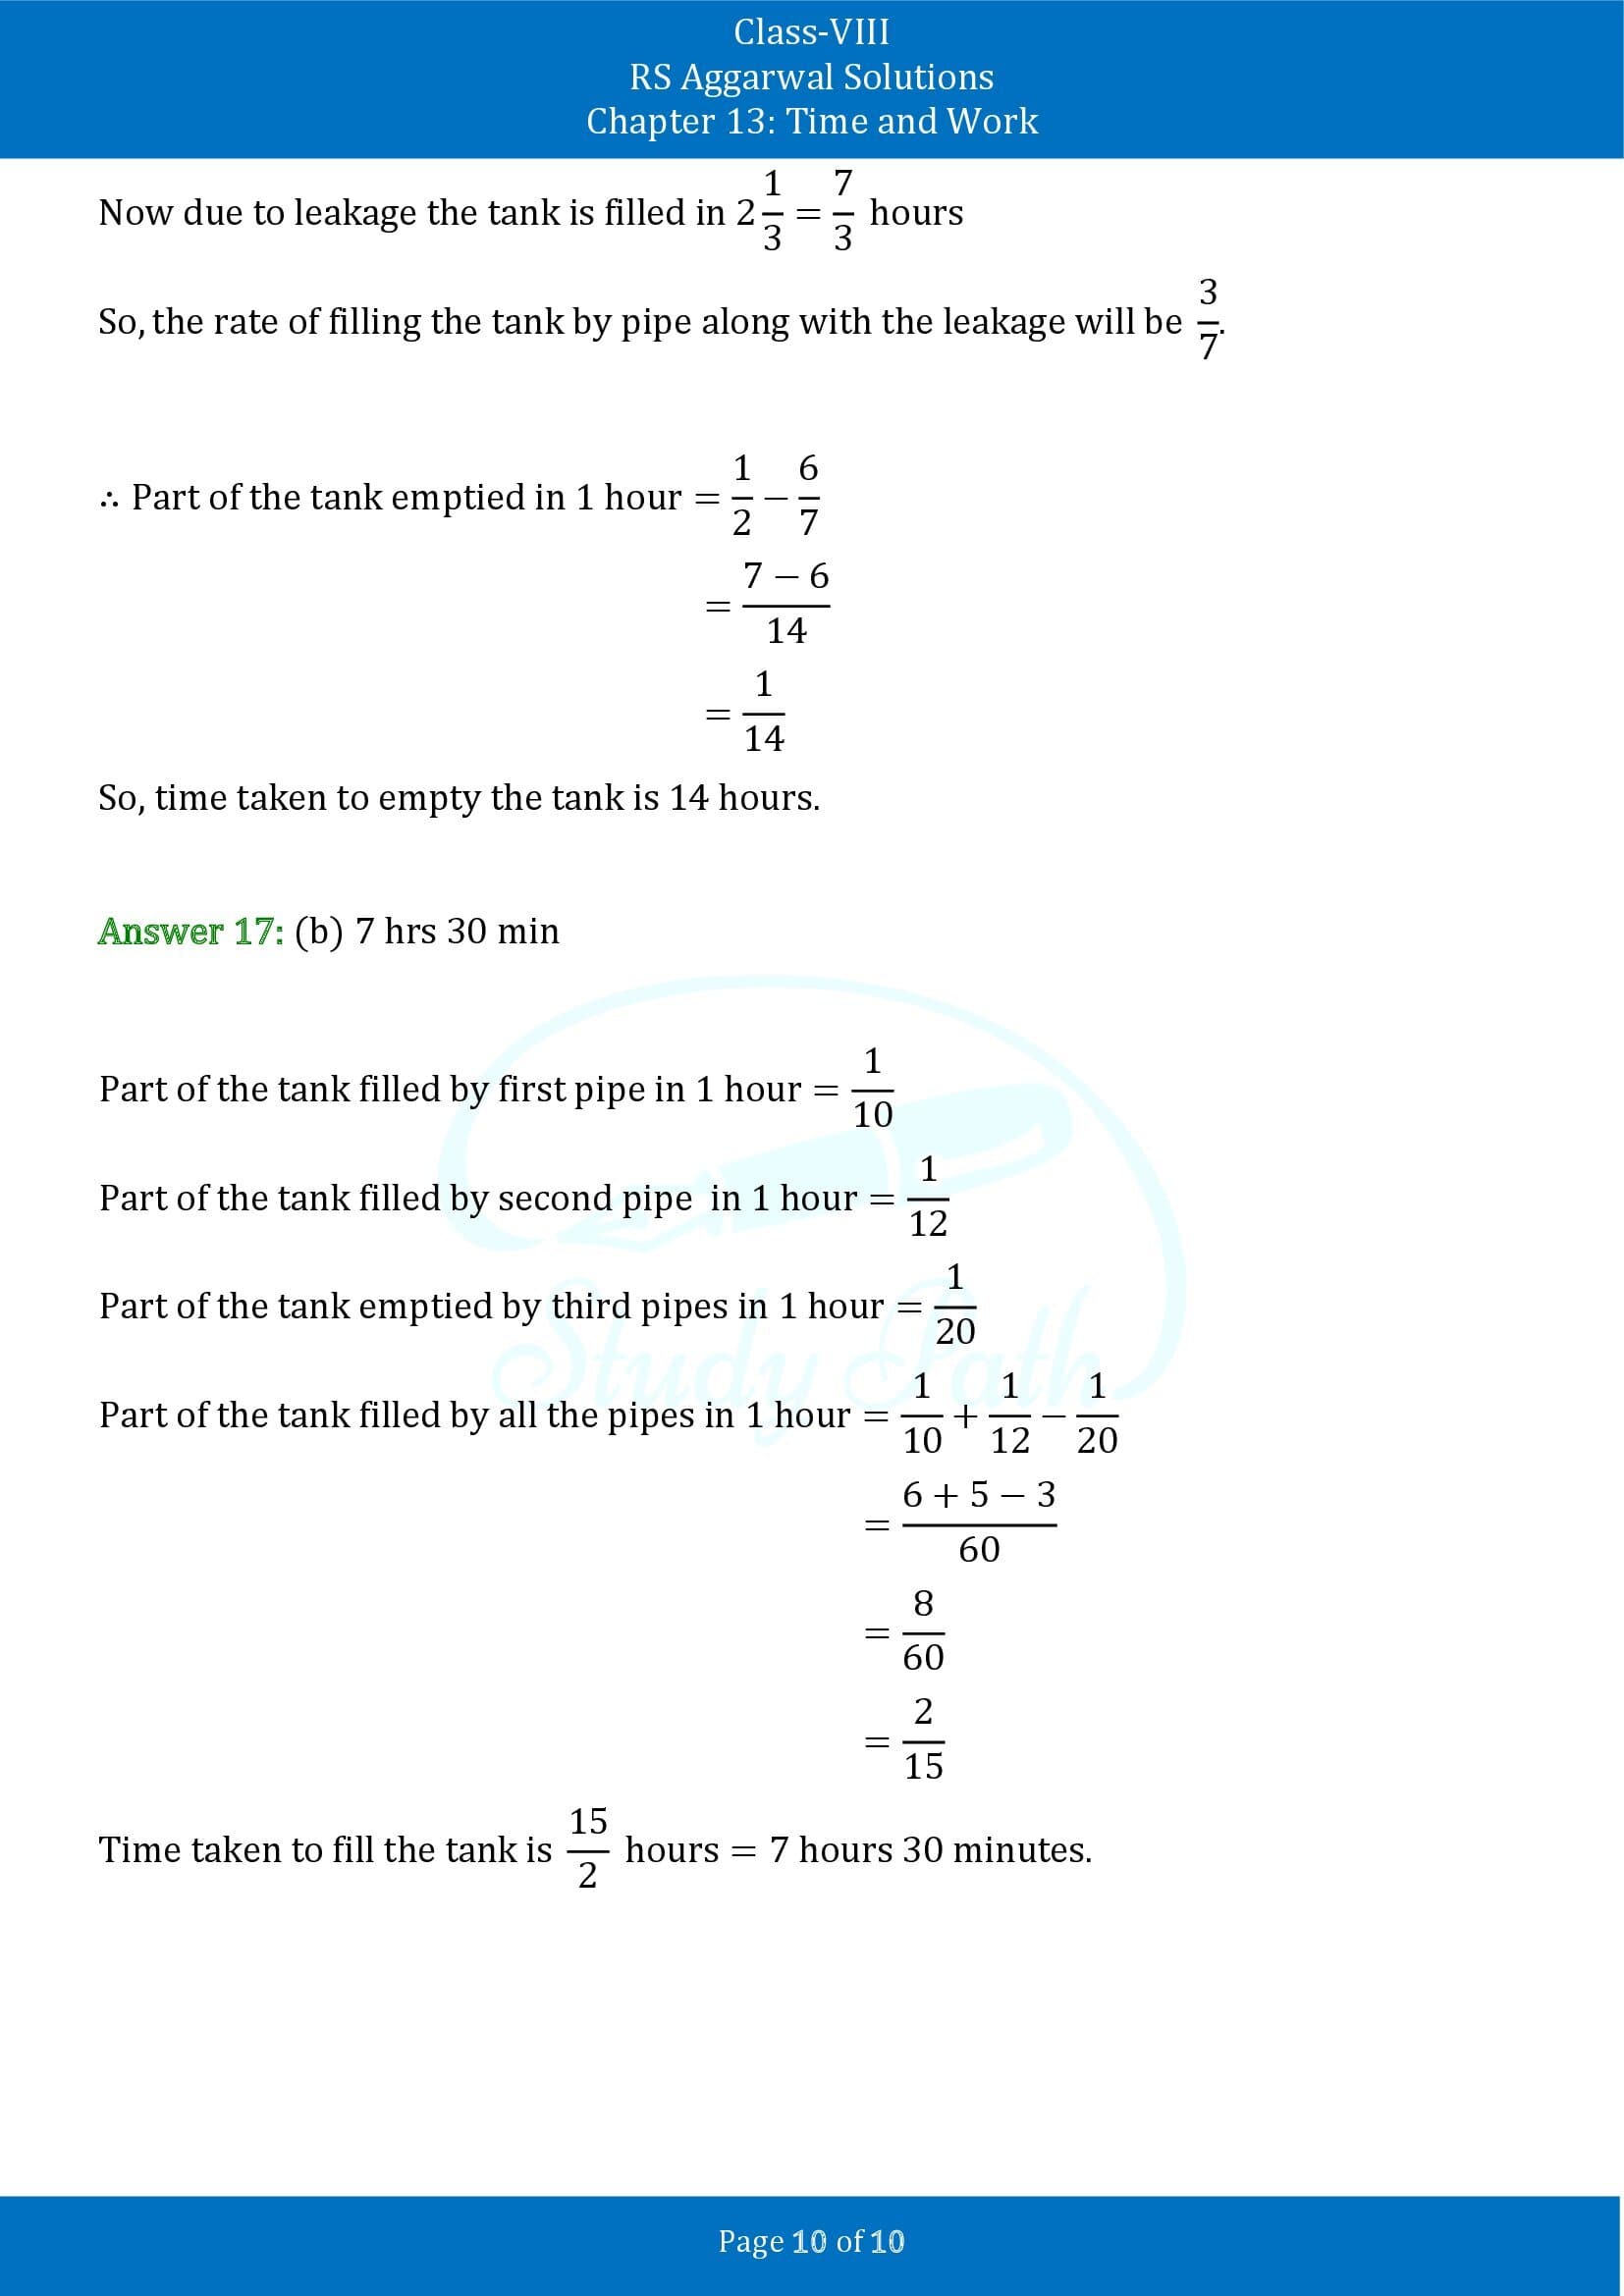 RS Aggarwal Solutions Class 8 Chapter 13 Time and Work Exercise 13B MCQs 00010